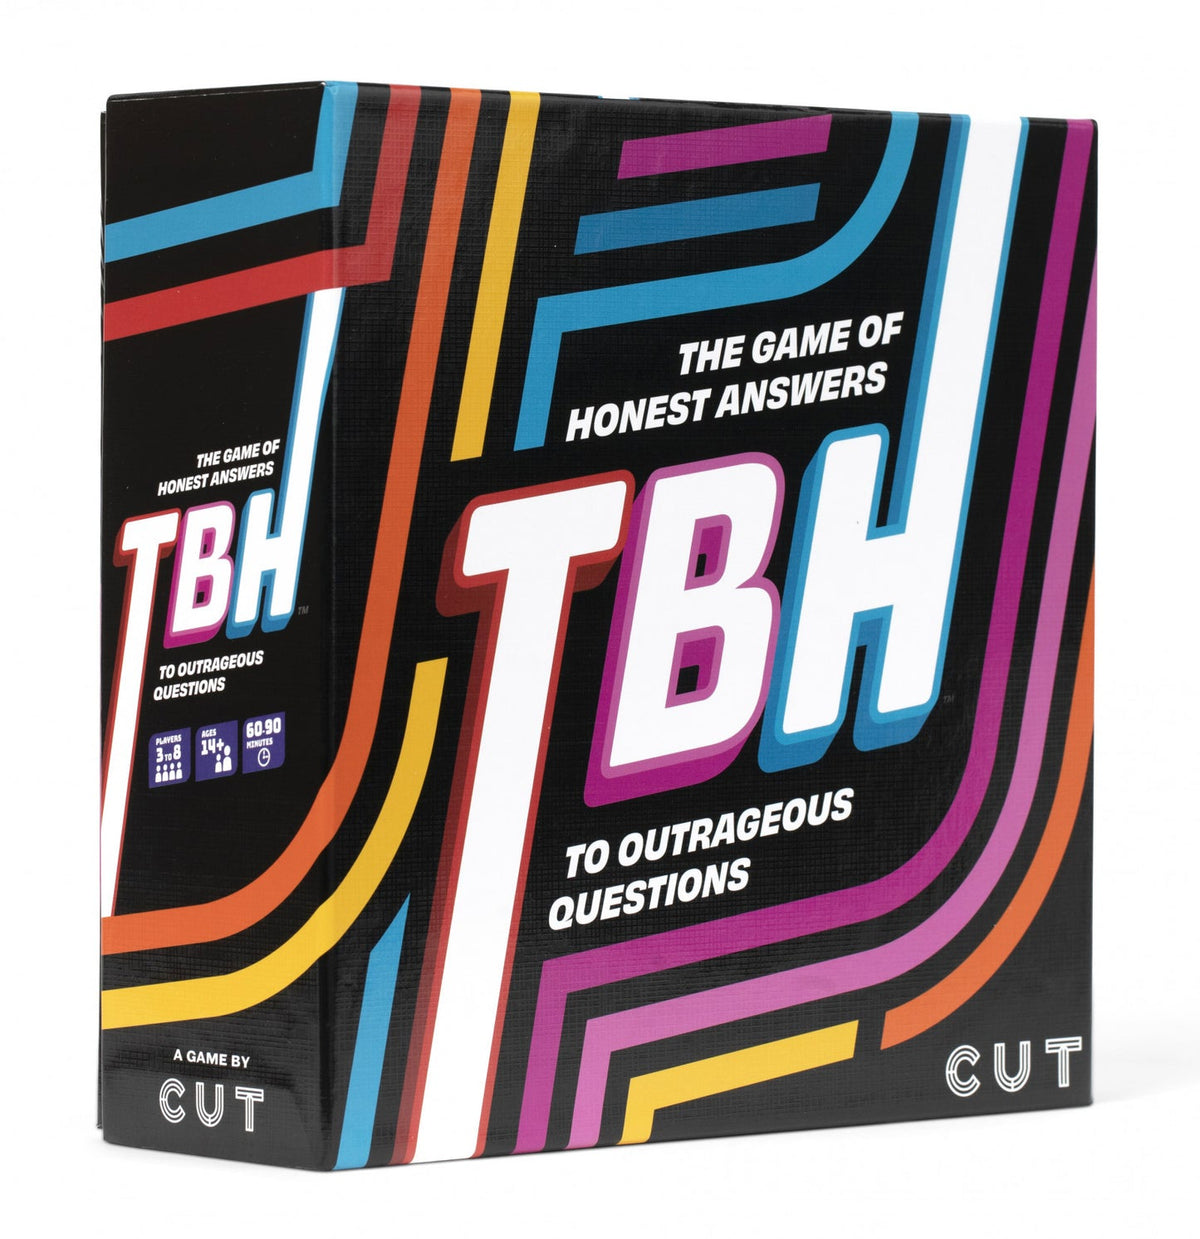 TBH: To Be Honest - The game of honest answers to outrageous questions